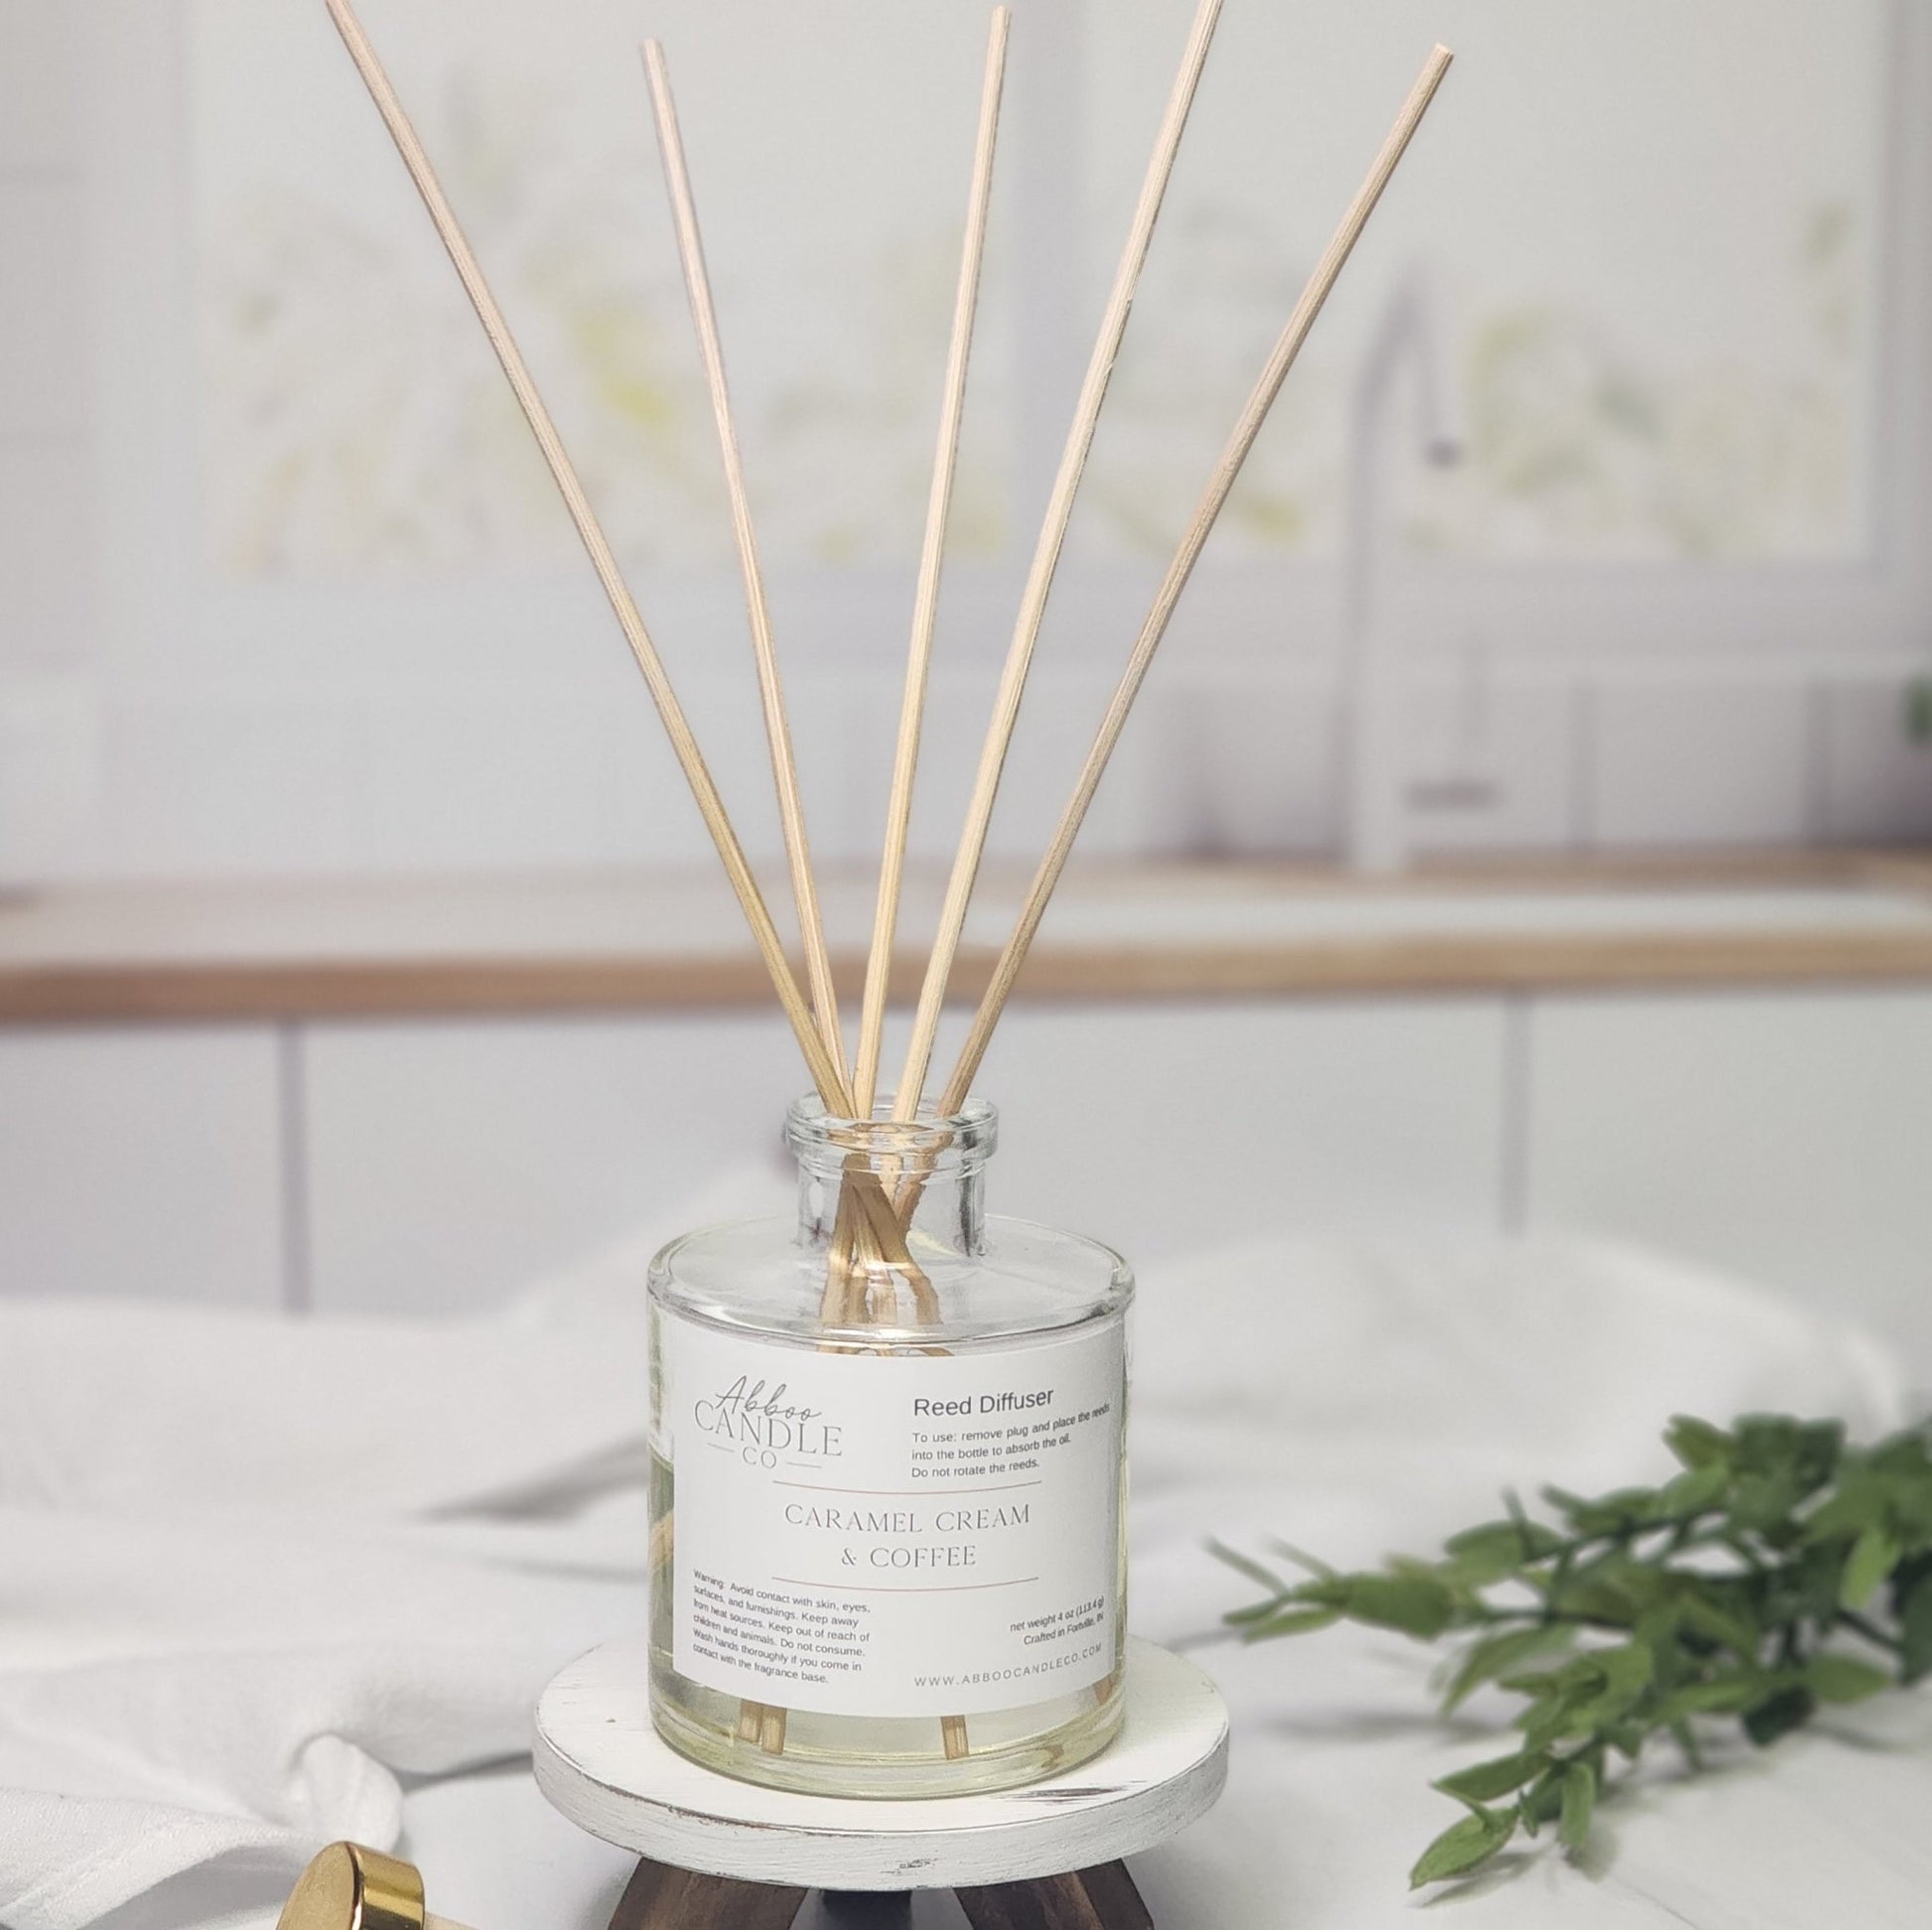 Reed Diffuser Home Fragrance - Caramel Cream and Coffee - Abboo Candle Co